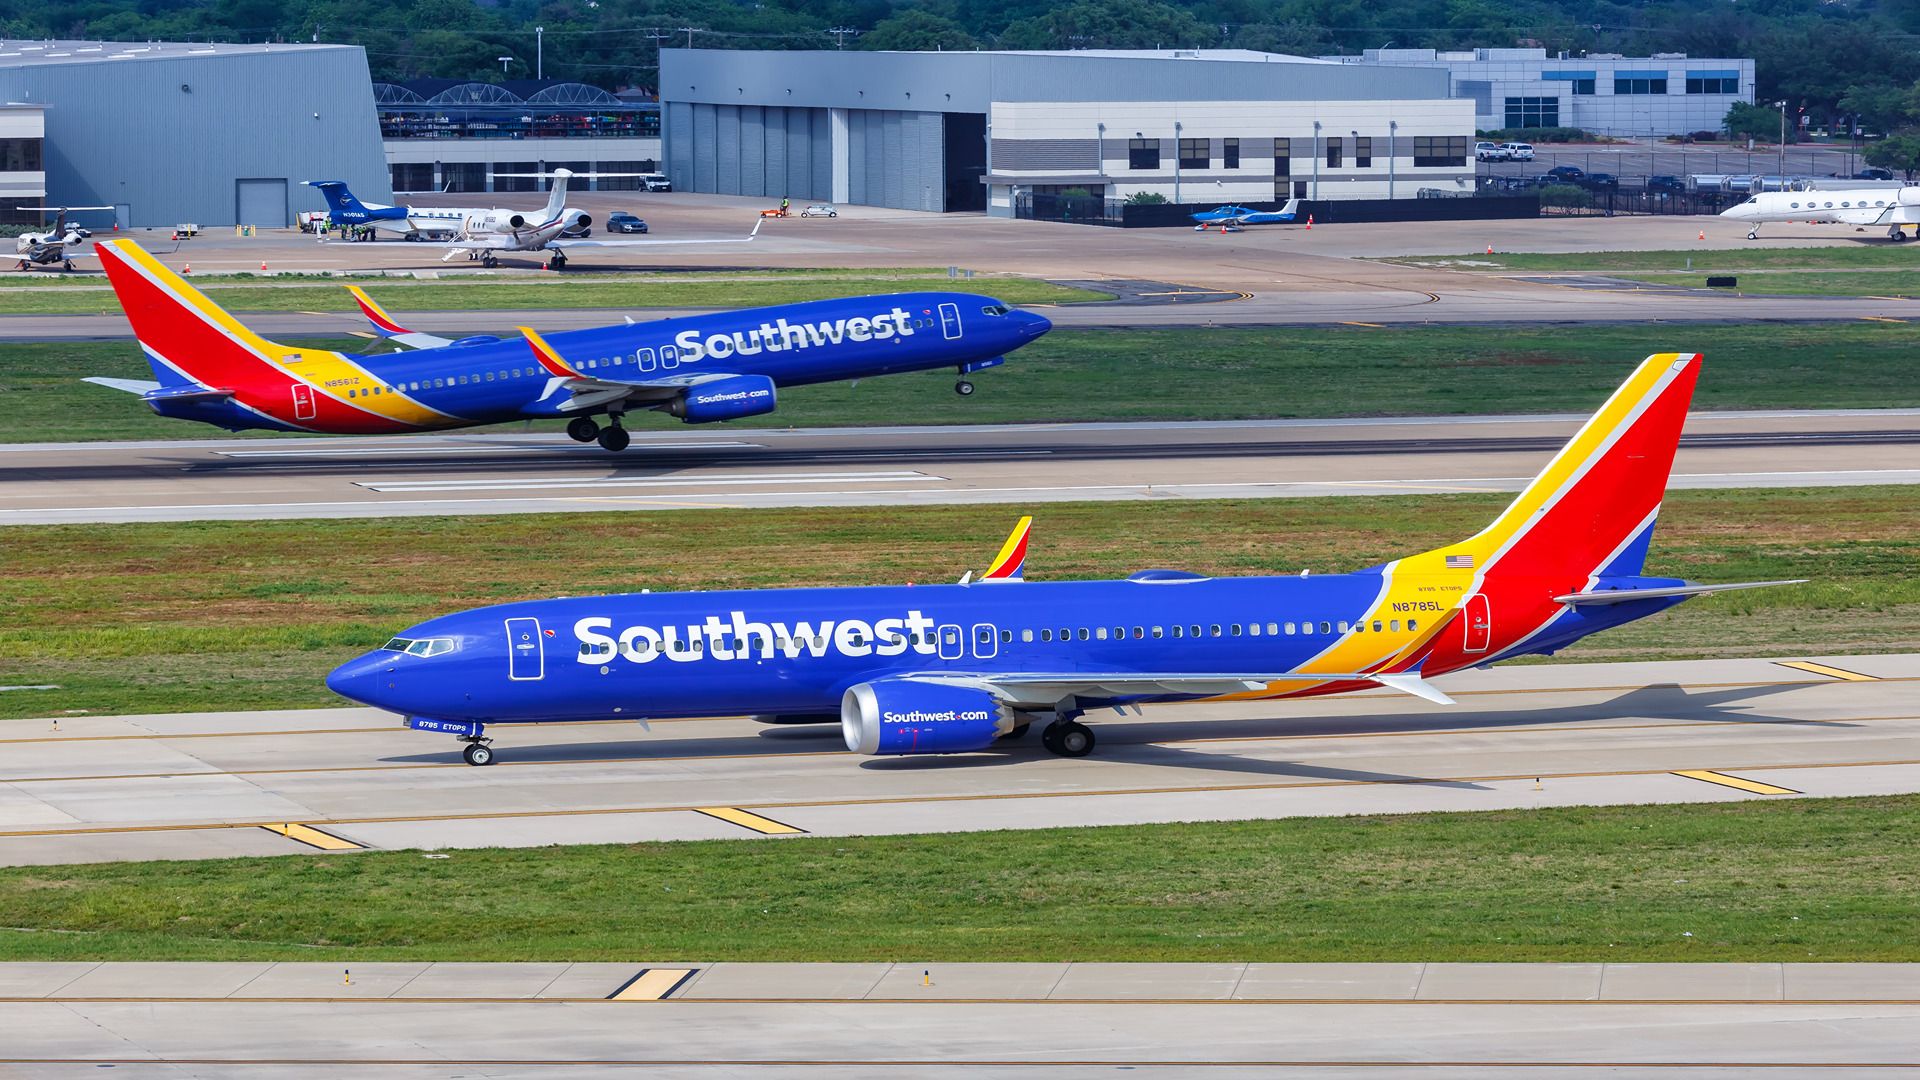 Two Southwest aircraft can be seen at Dallas Love Field 